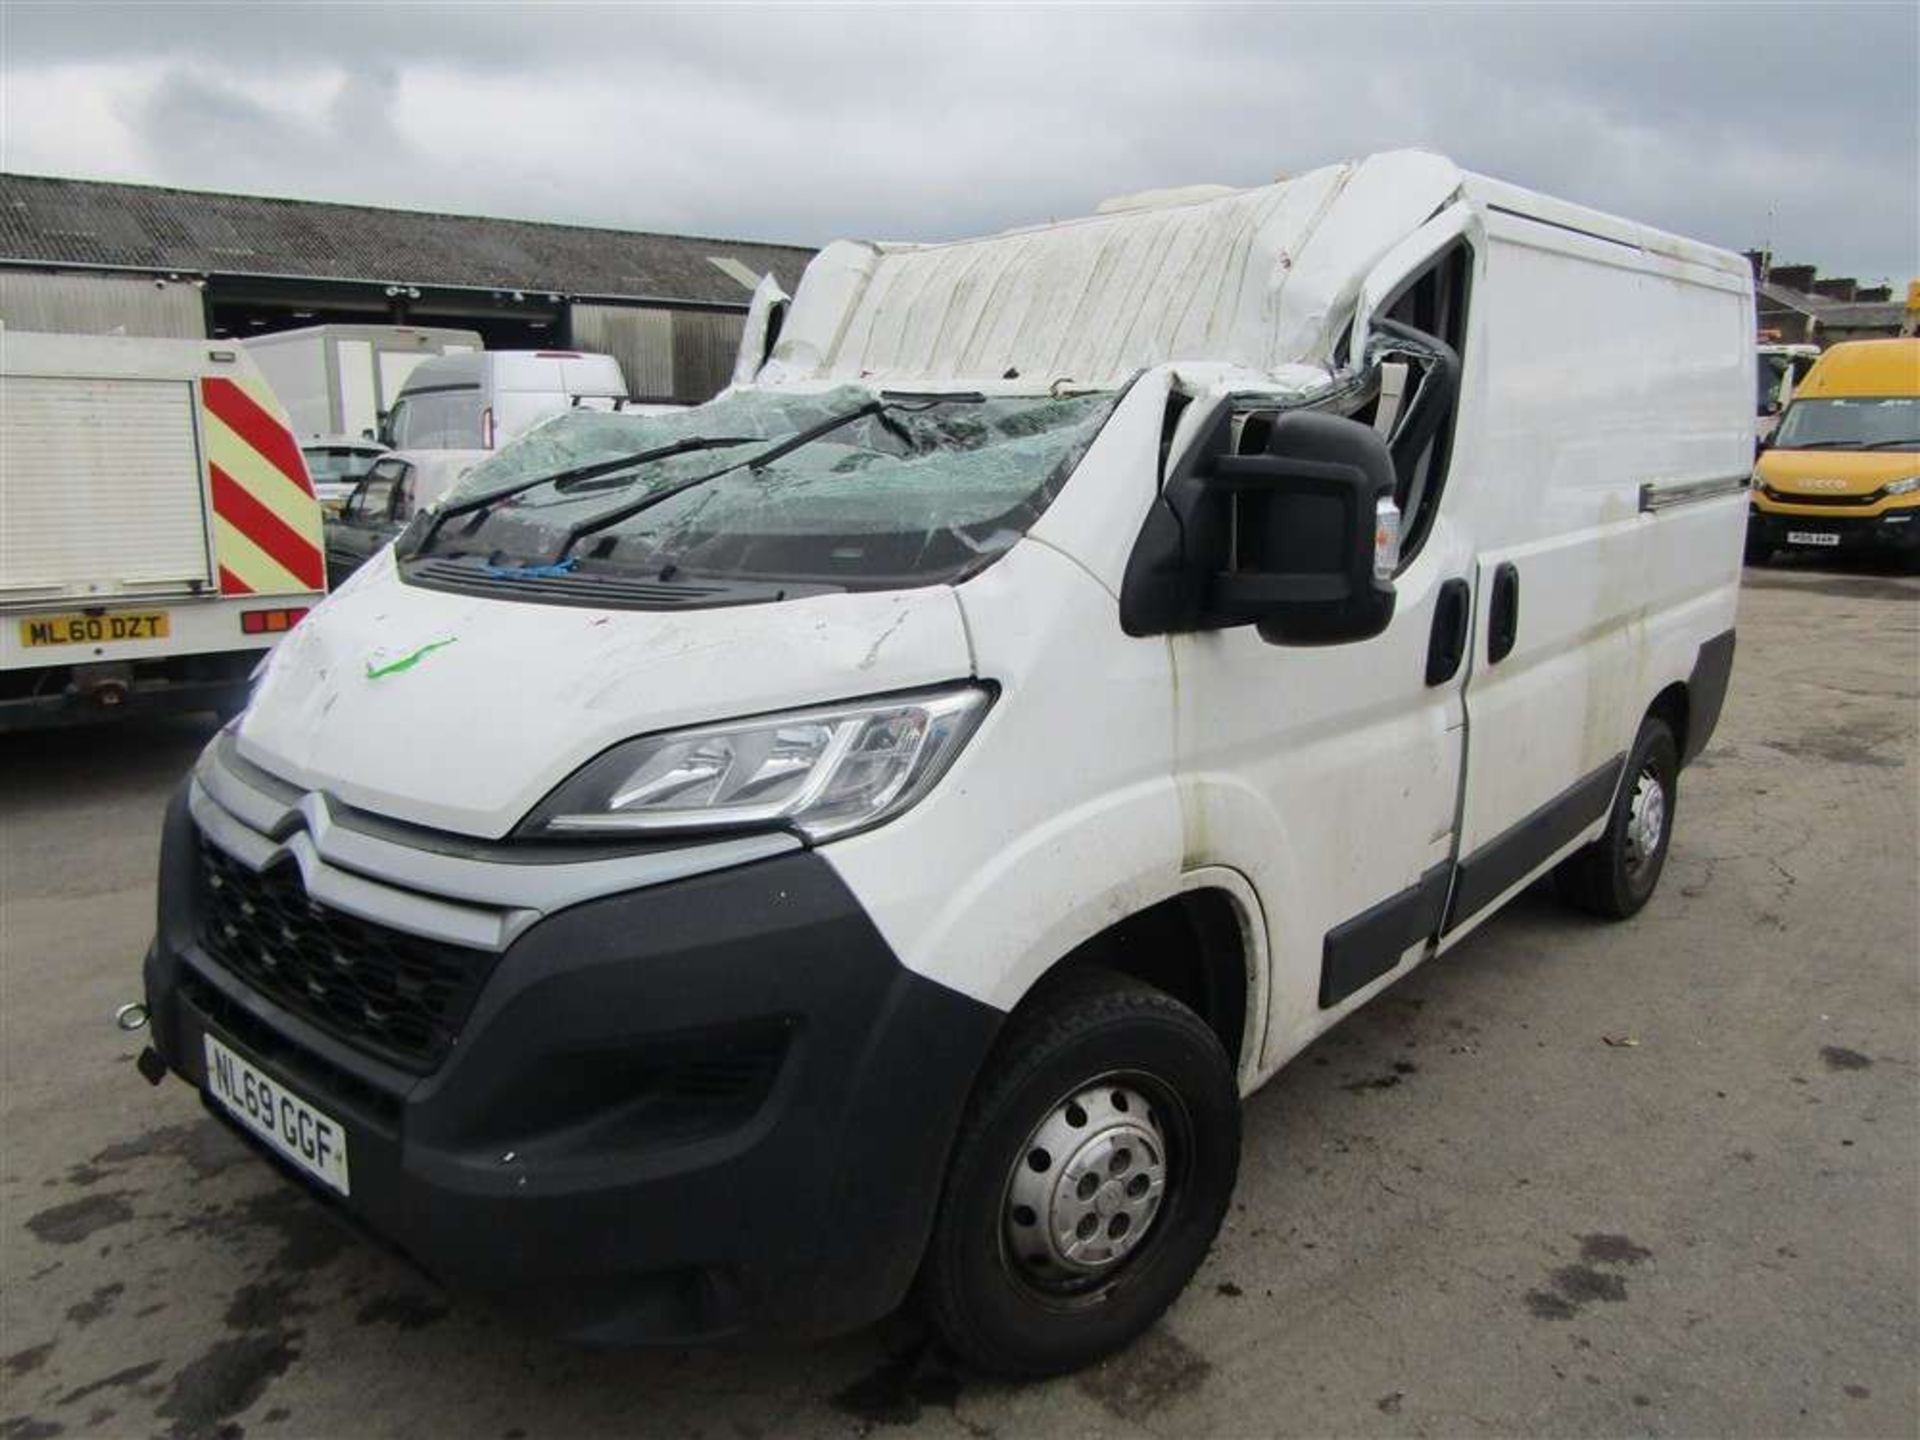 2019 69 reg Citroen Relay 33 L1H1 Eprise BHDI S/S (Runs/Drives CAT B-Spares Only) (Direct Council) - Image 2 of 7